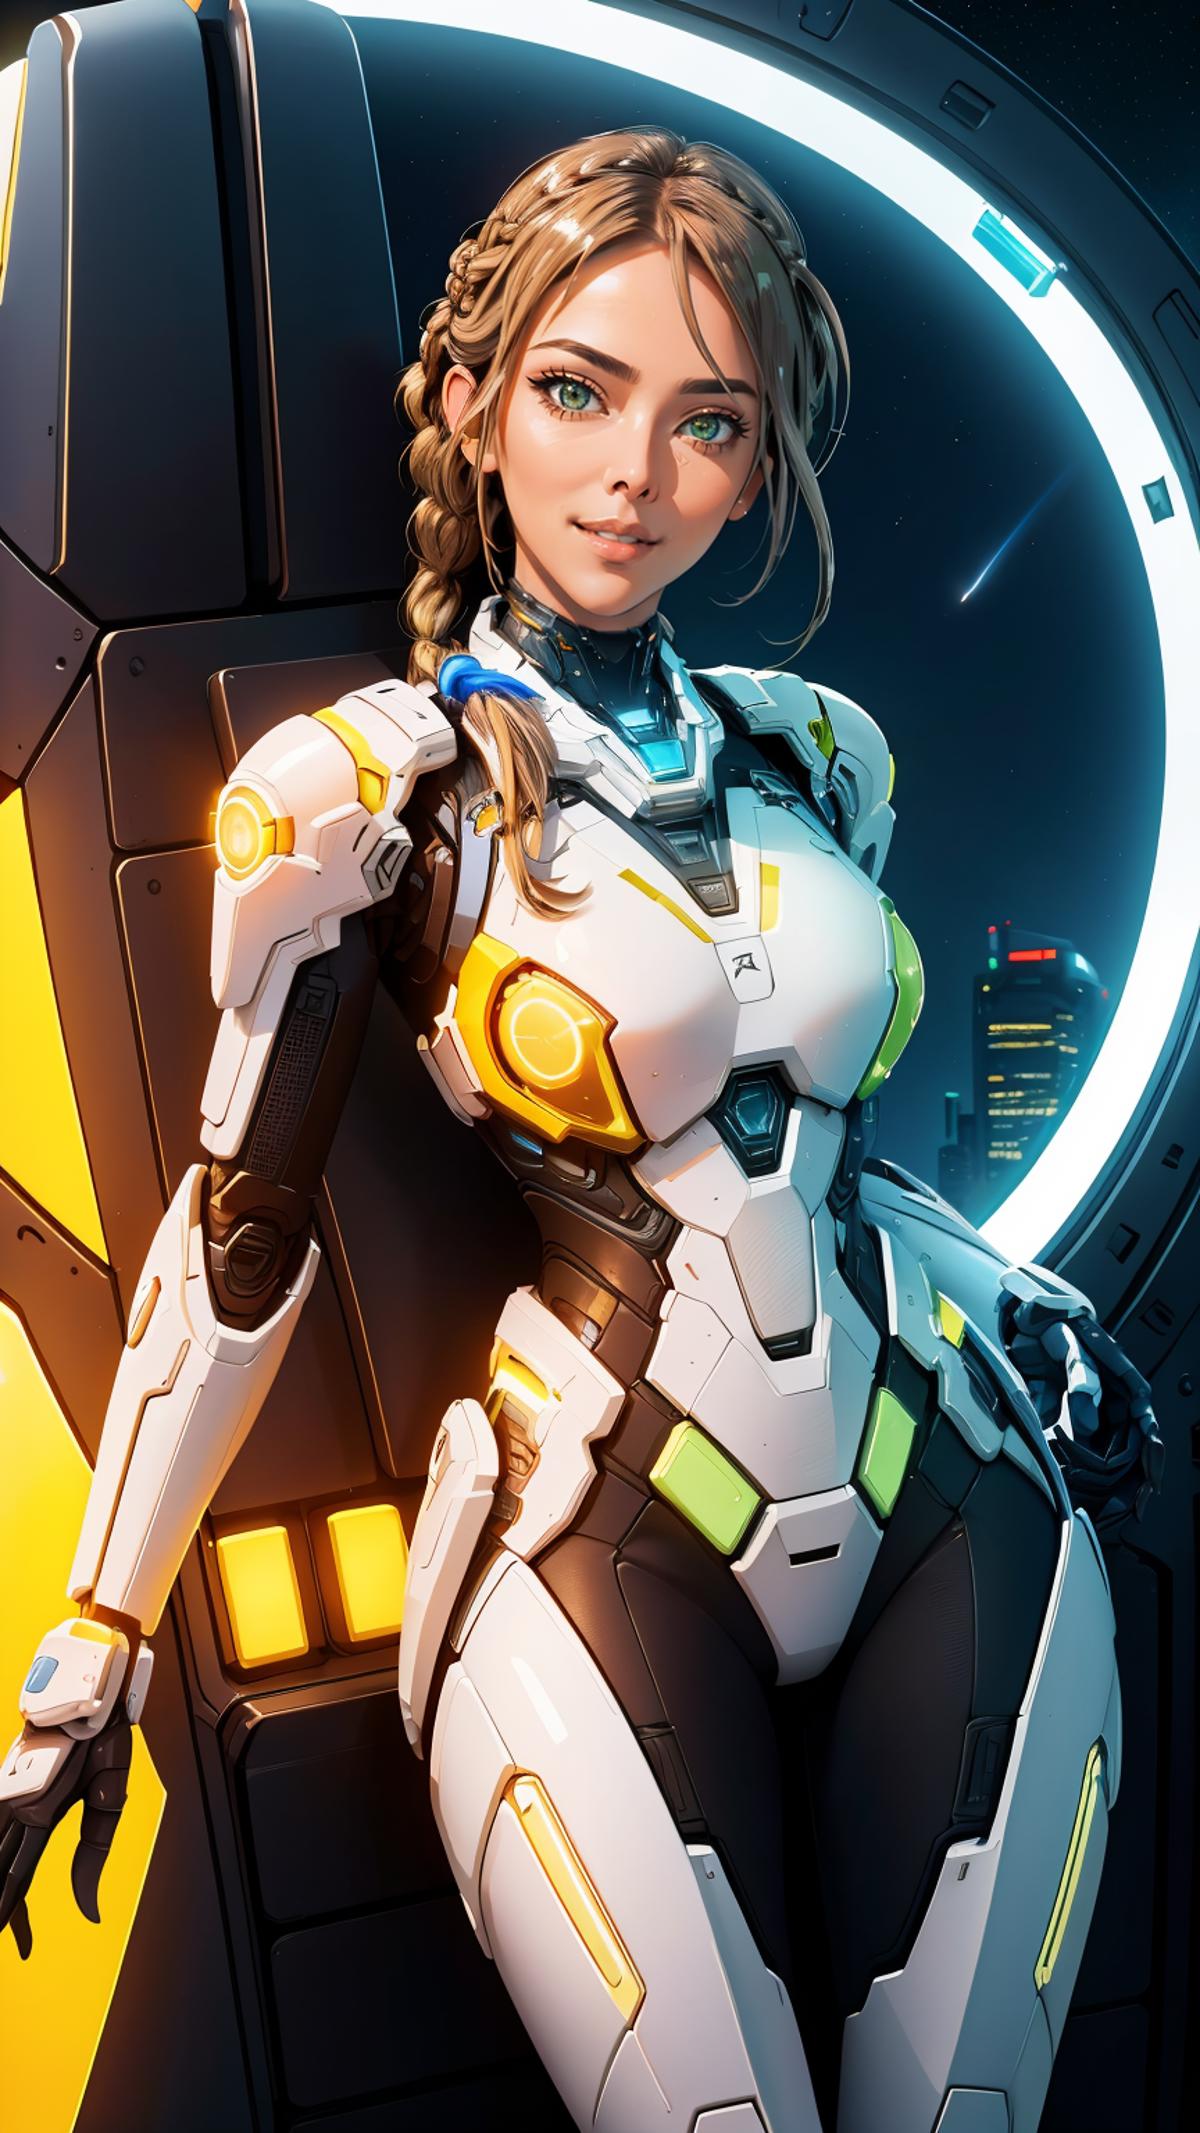 A 3D-rendered female character wearing a tight white and green suit.